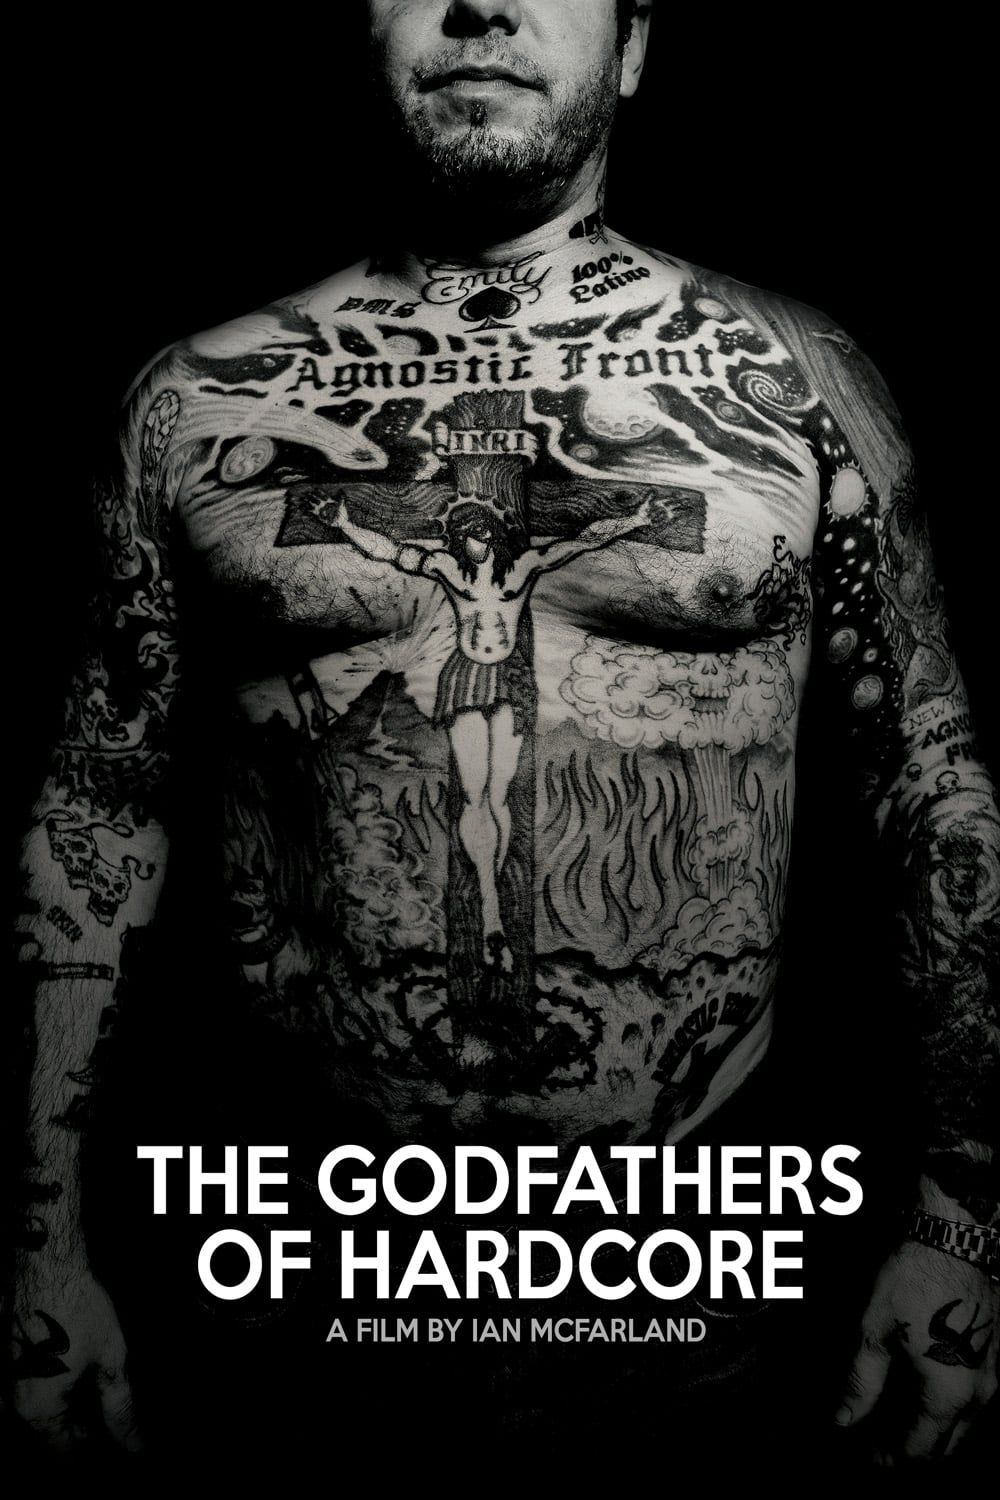 Documentary following Roger Miret and Vinnie Stigma of the band, Agnostic Front who played a key role. The godfather, The godfather full movie, Free movies online